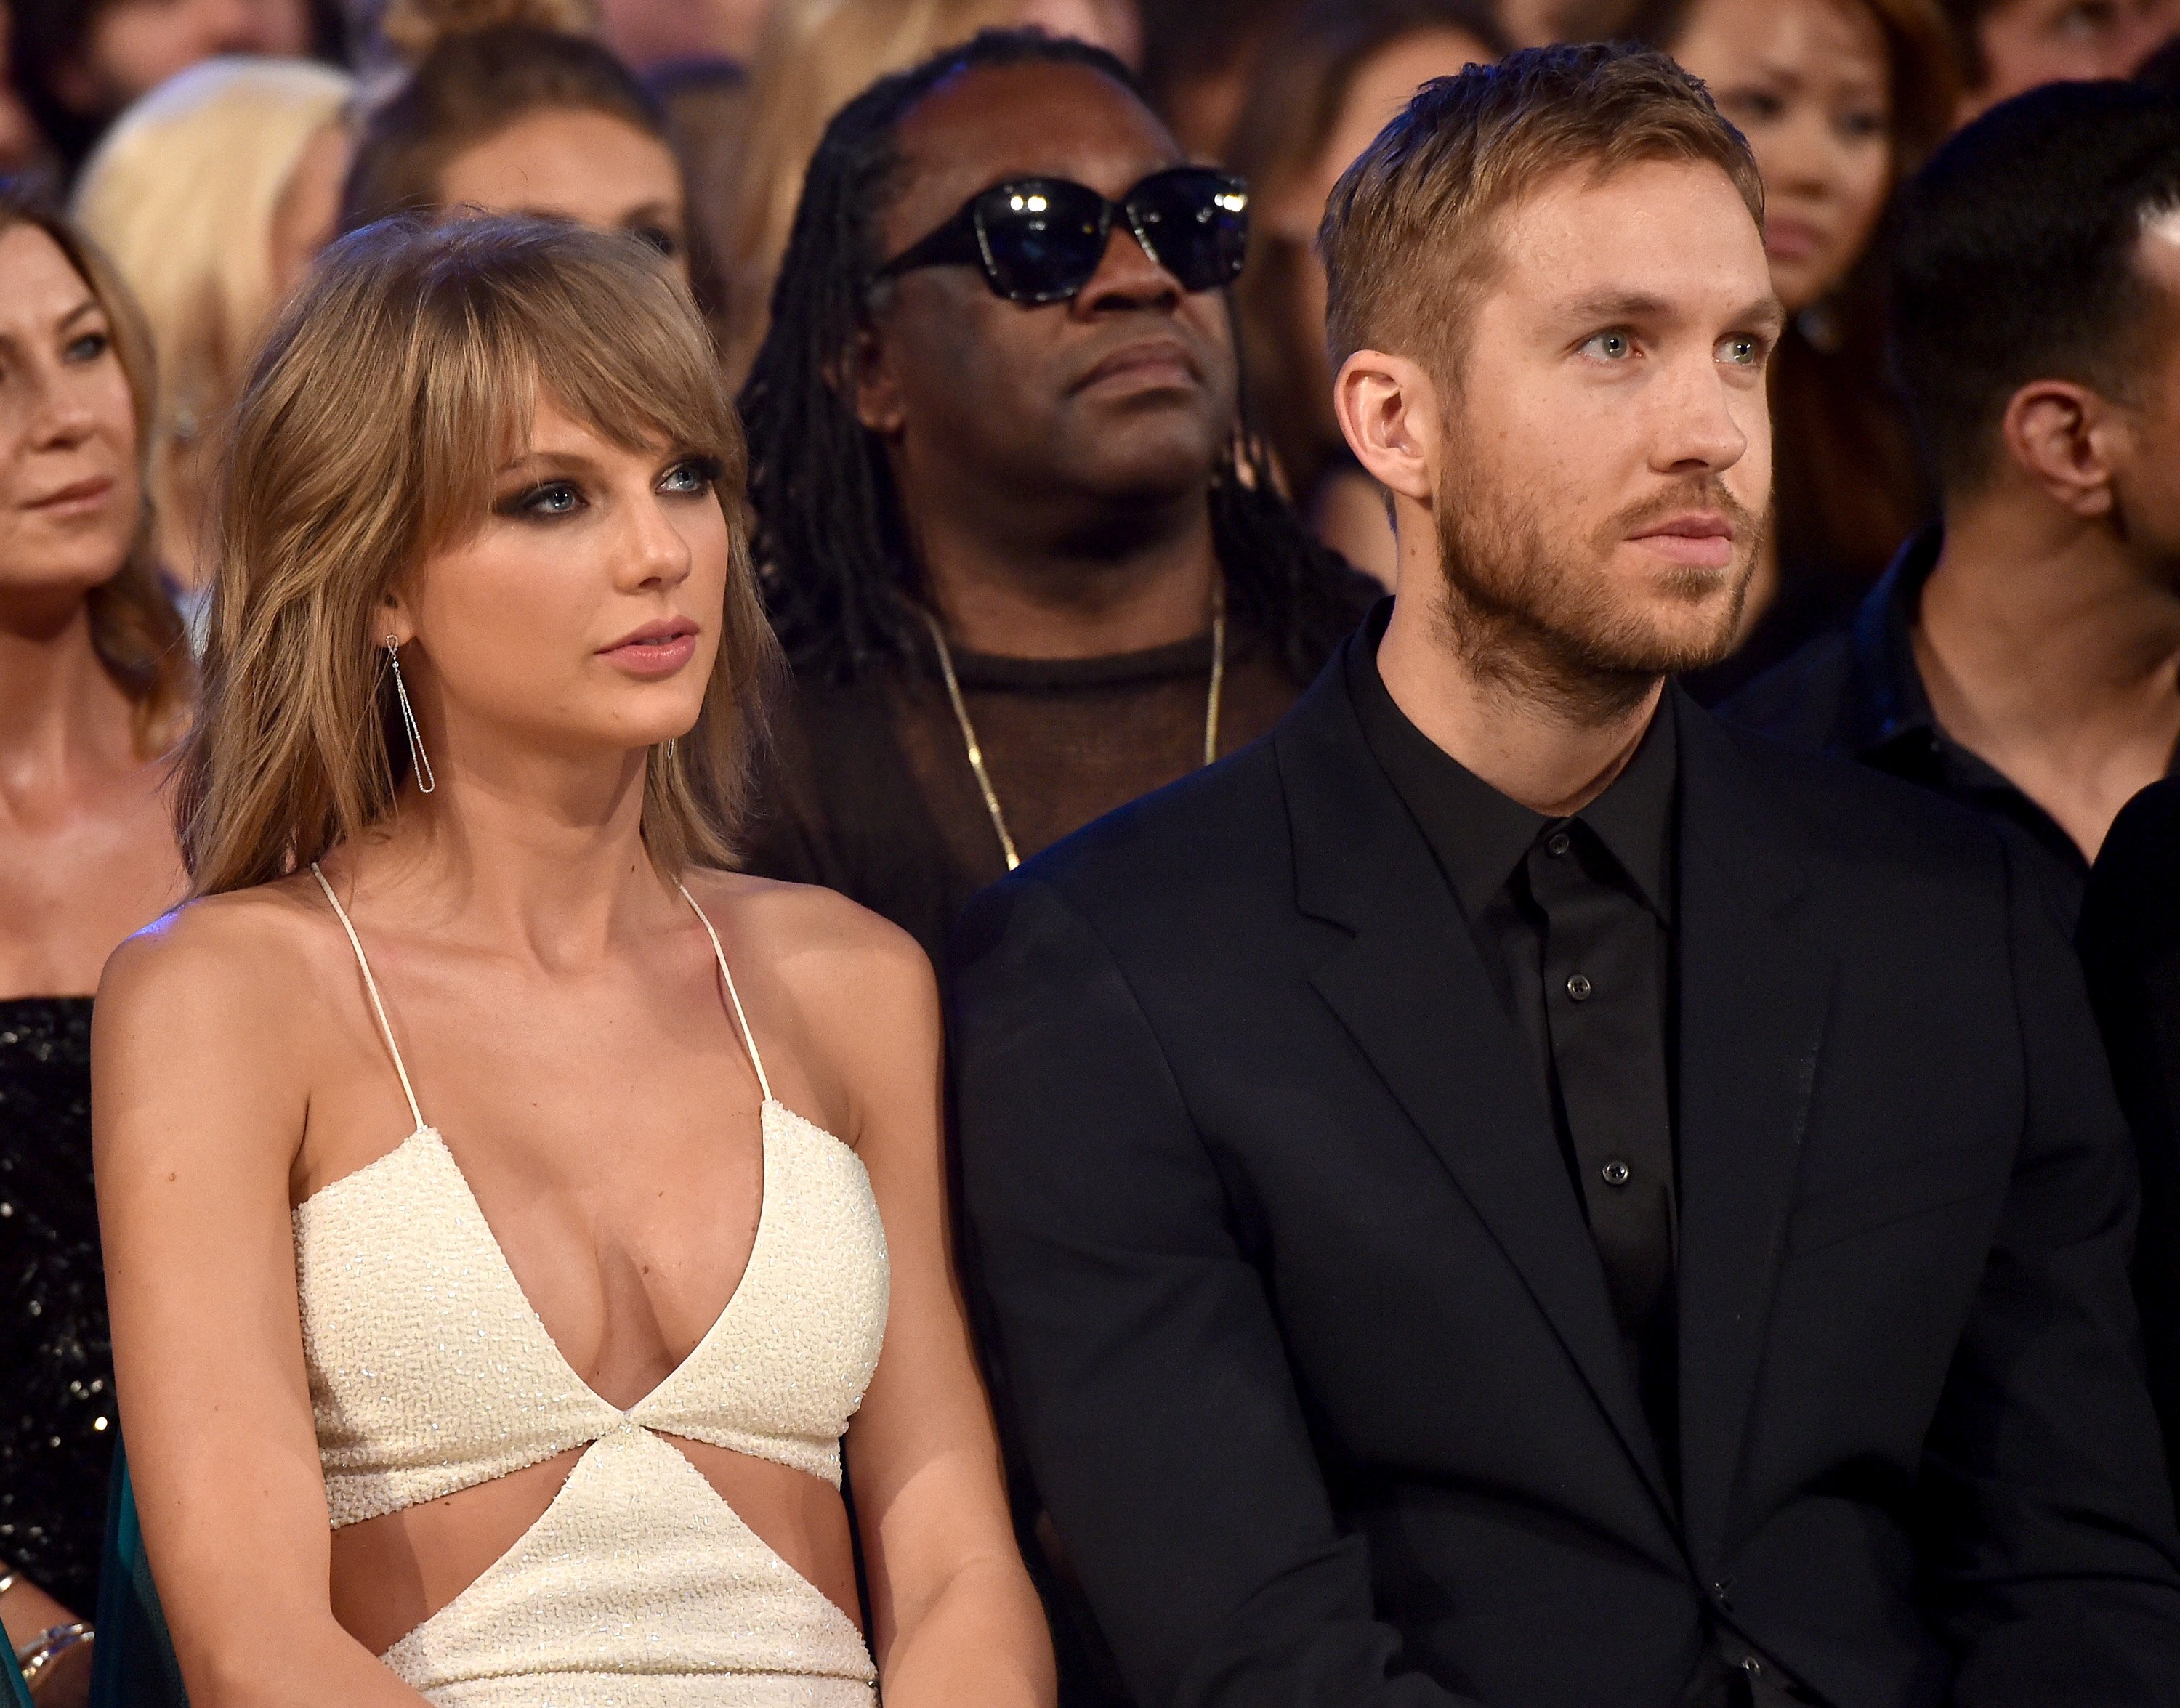 Taylor Swift and Calvin Harris seated in a crowd